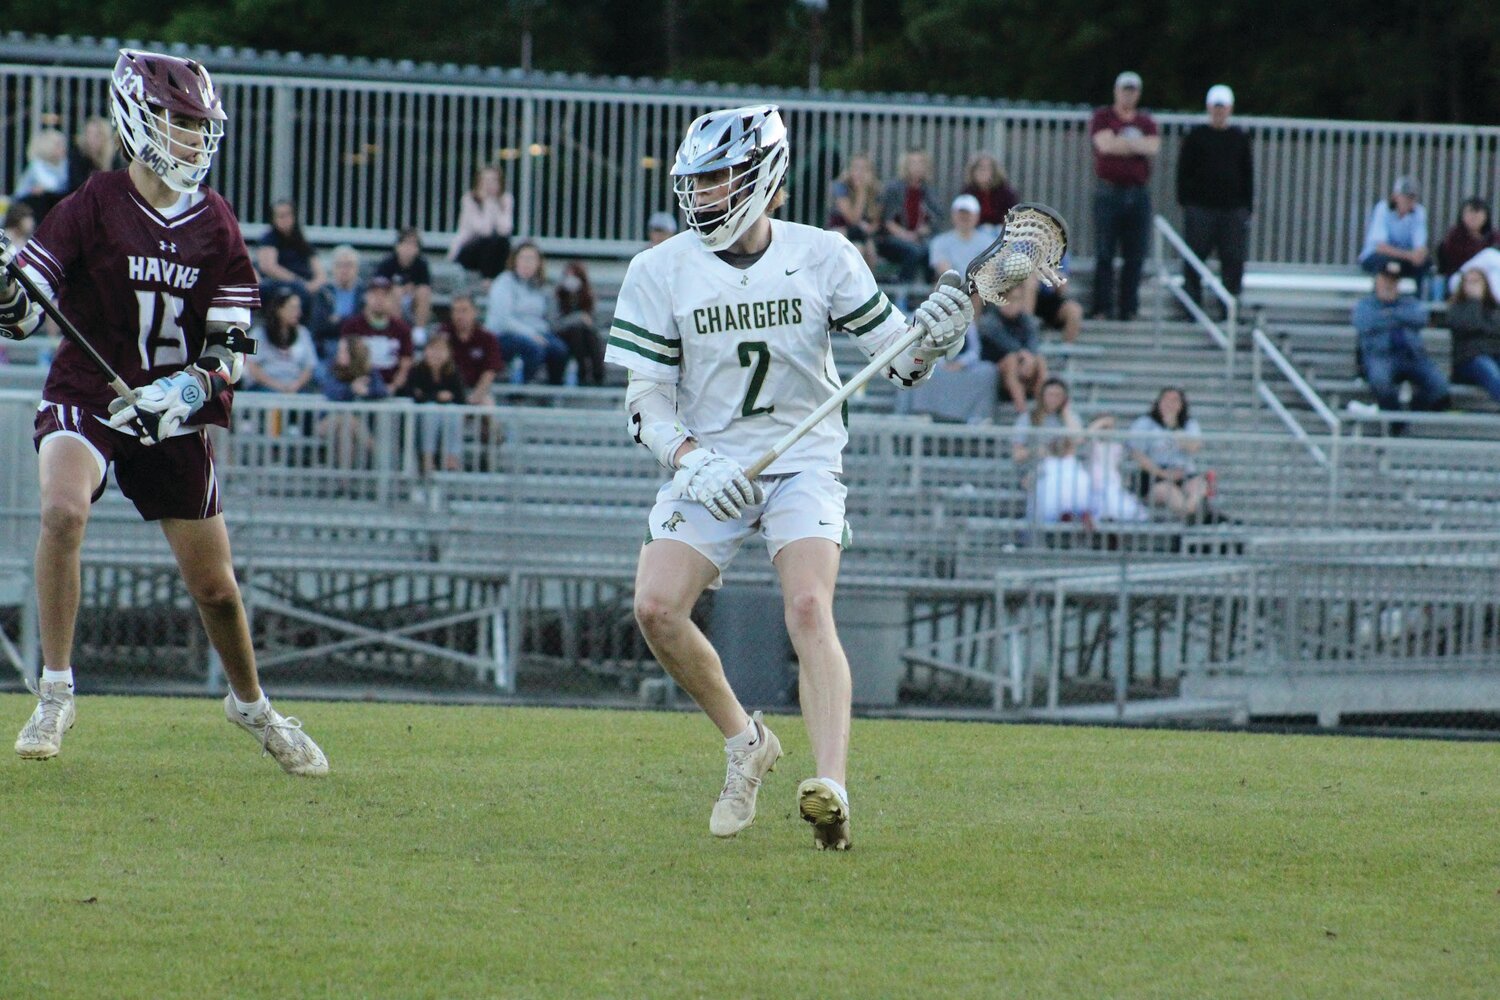 Northood senior Will Smith (2) had three goals and four assists in a 15-2 win over Seaforth last Friday.